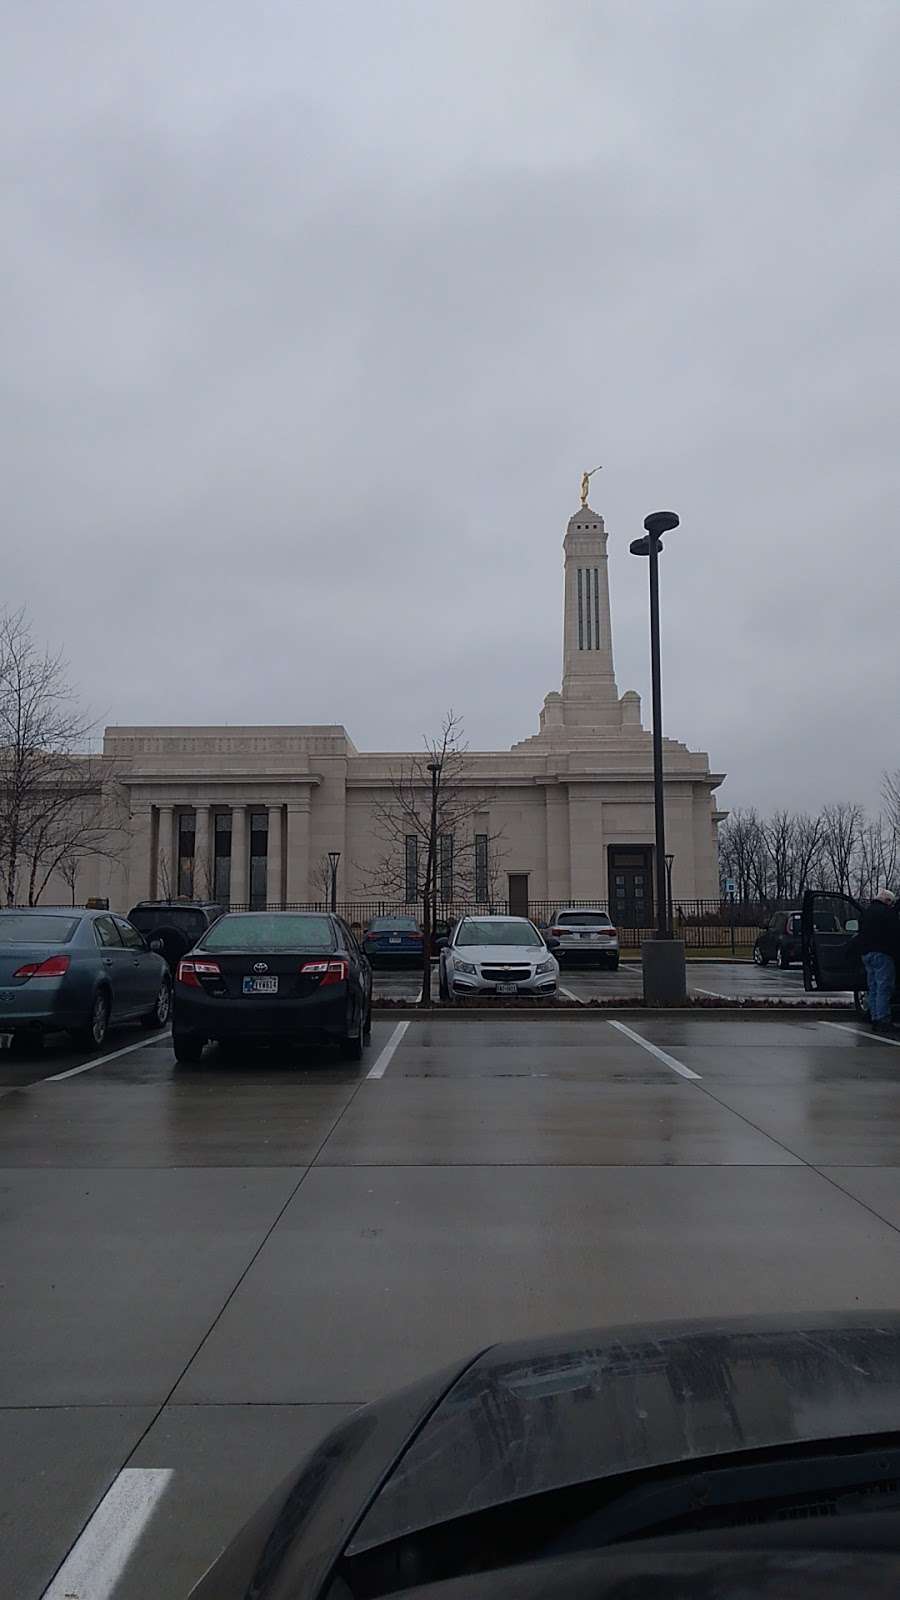 The Church of Jesus Christ of Latter-day Saints | 11257 Temple Dr, Carmel, IN 46032 | Phone: (317) 873-1745